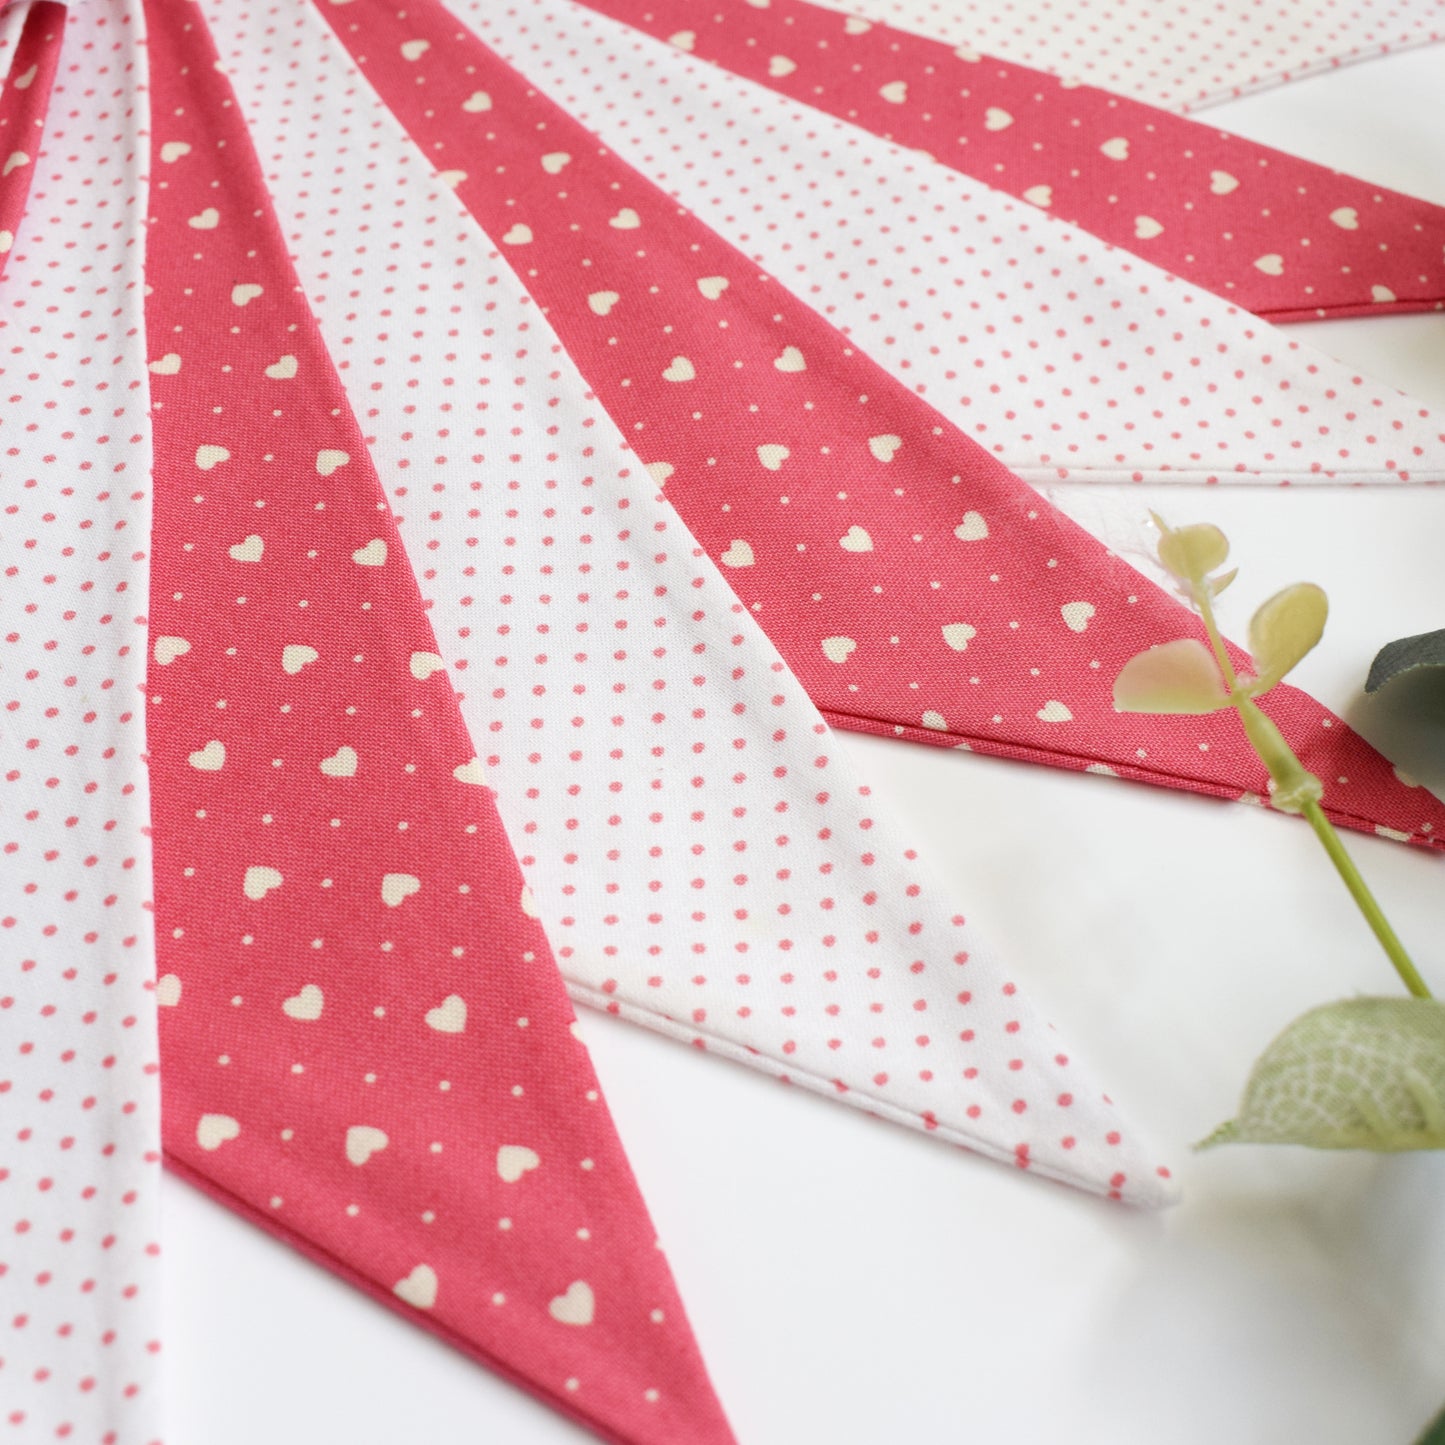 Pink Heart Bunting